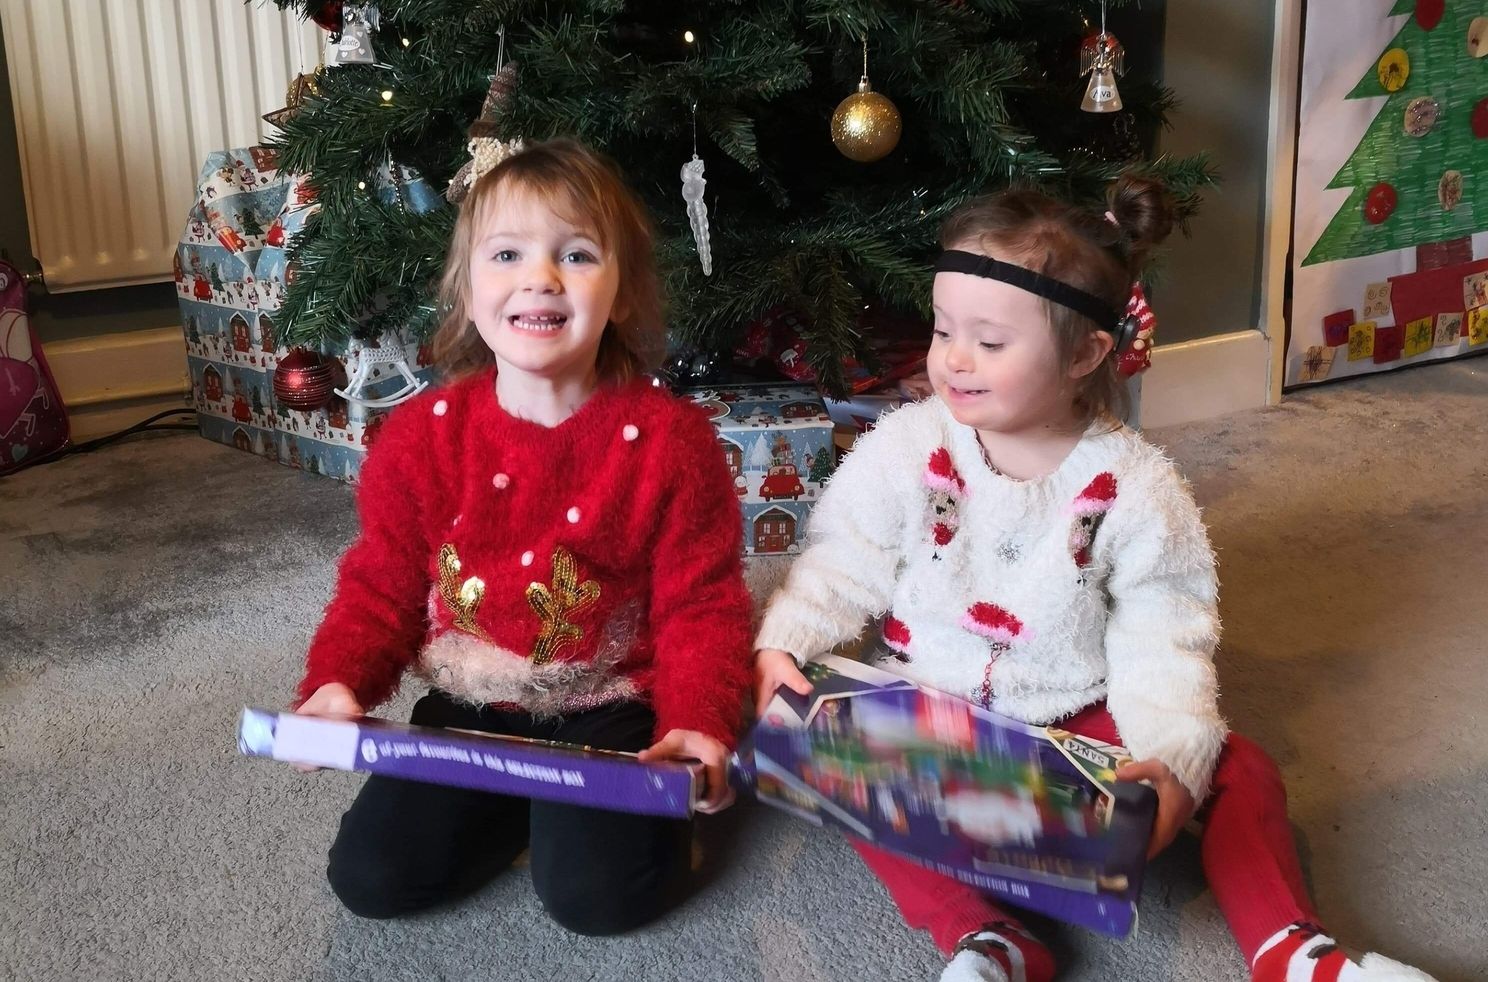 Two children sitting in front of christmas tree with gifts